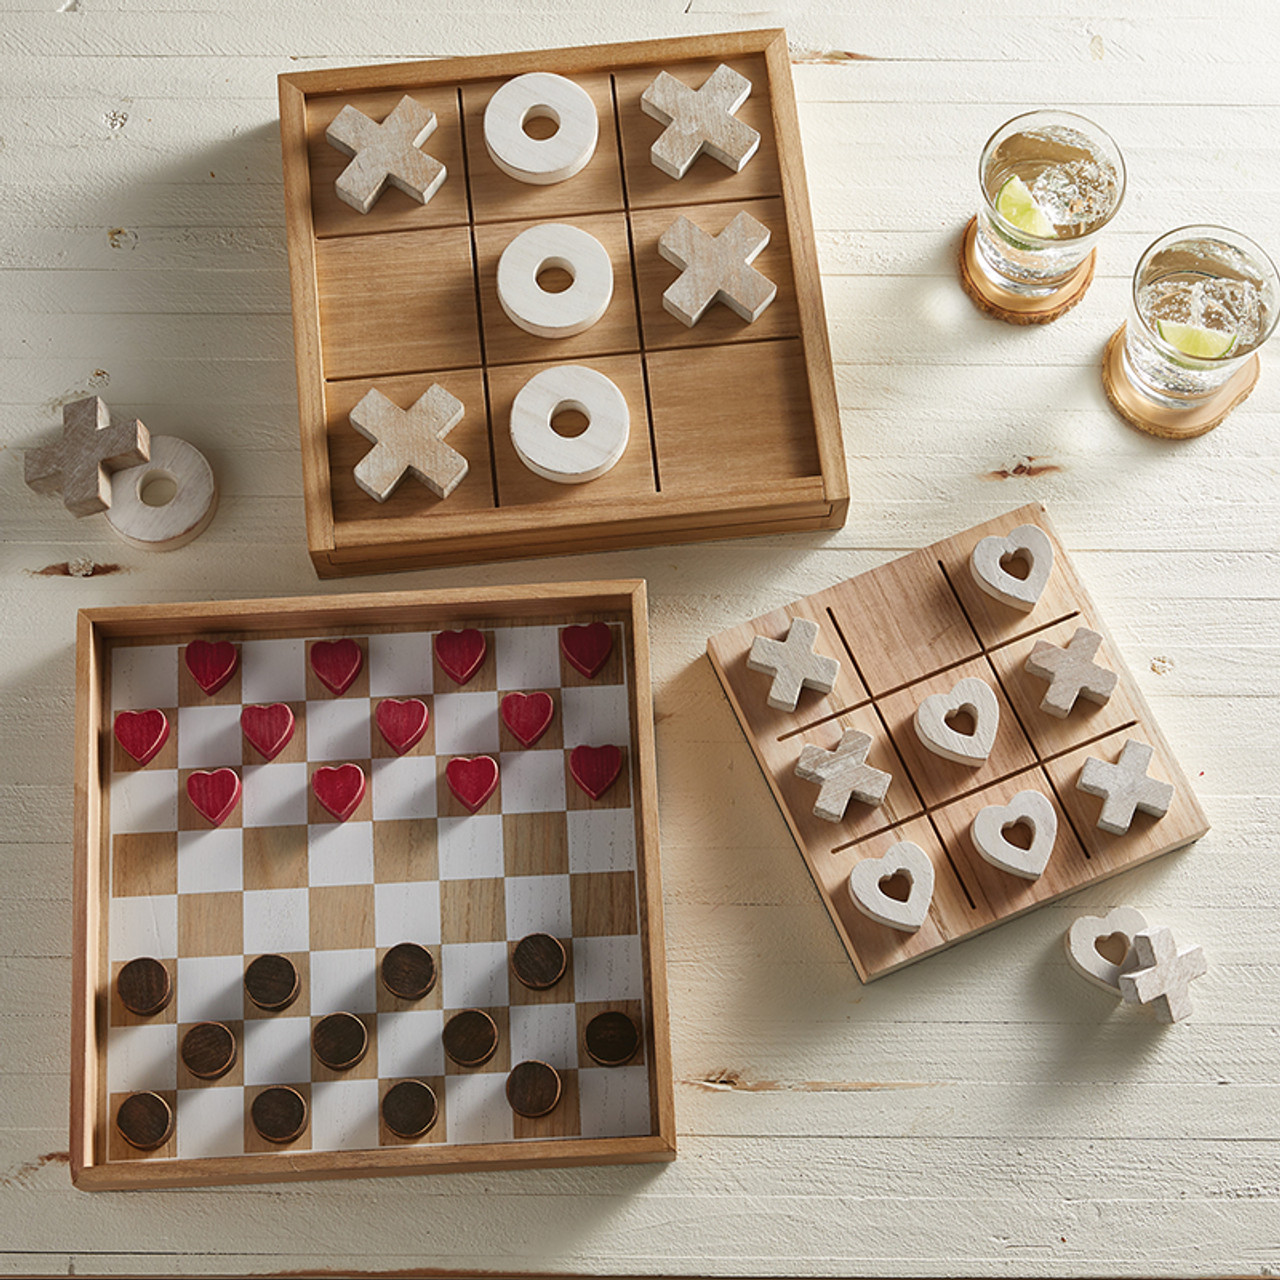 Mosaic Tic Tac Toe - Wooden Strategy Game-236V